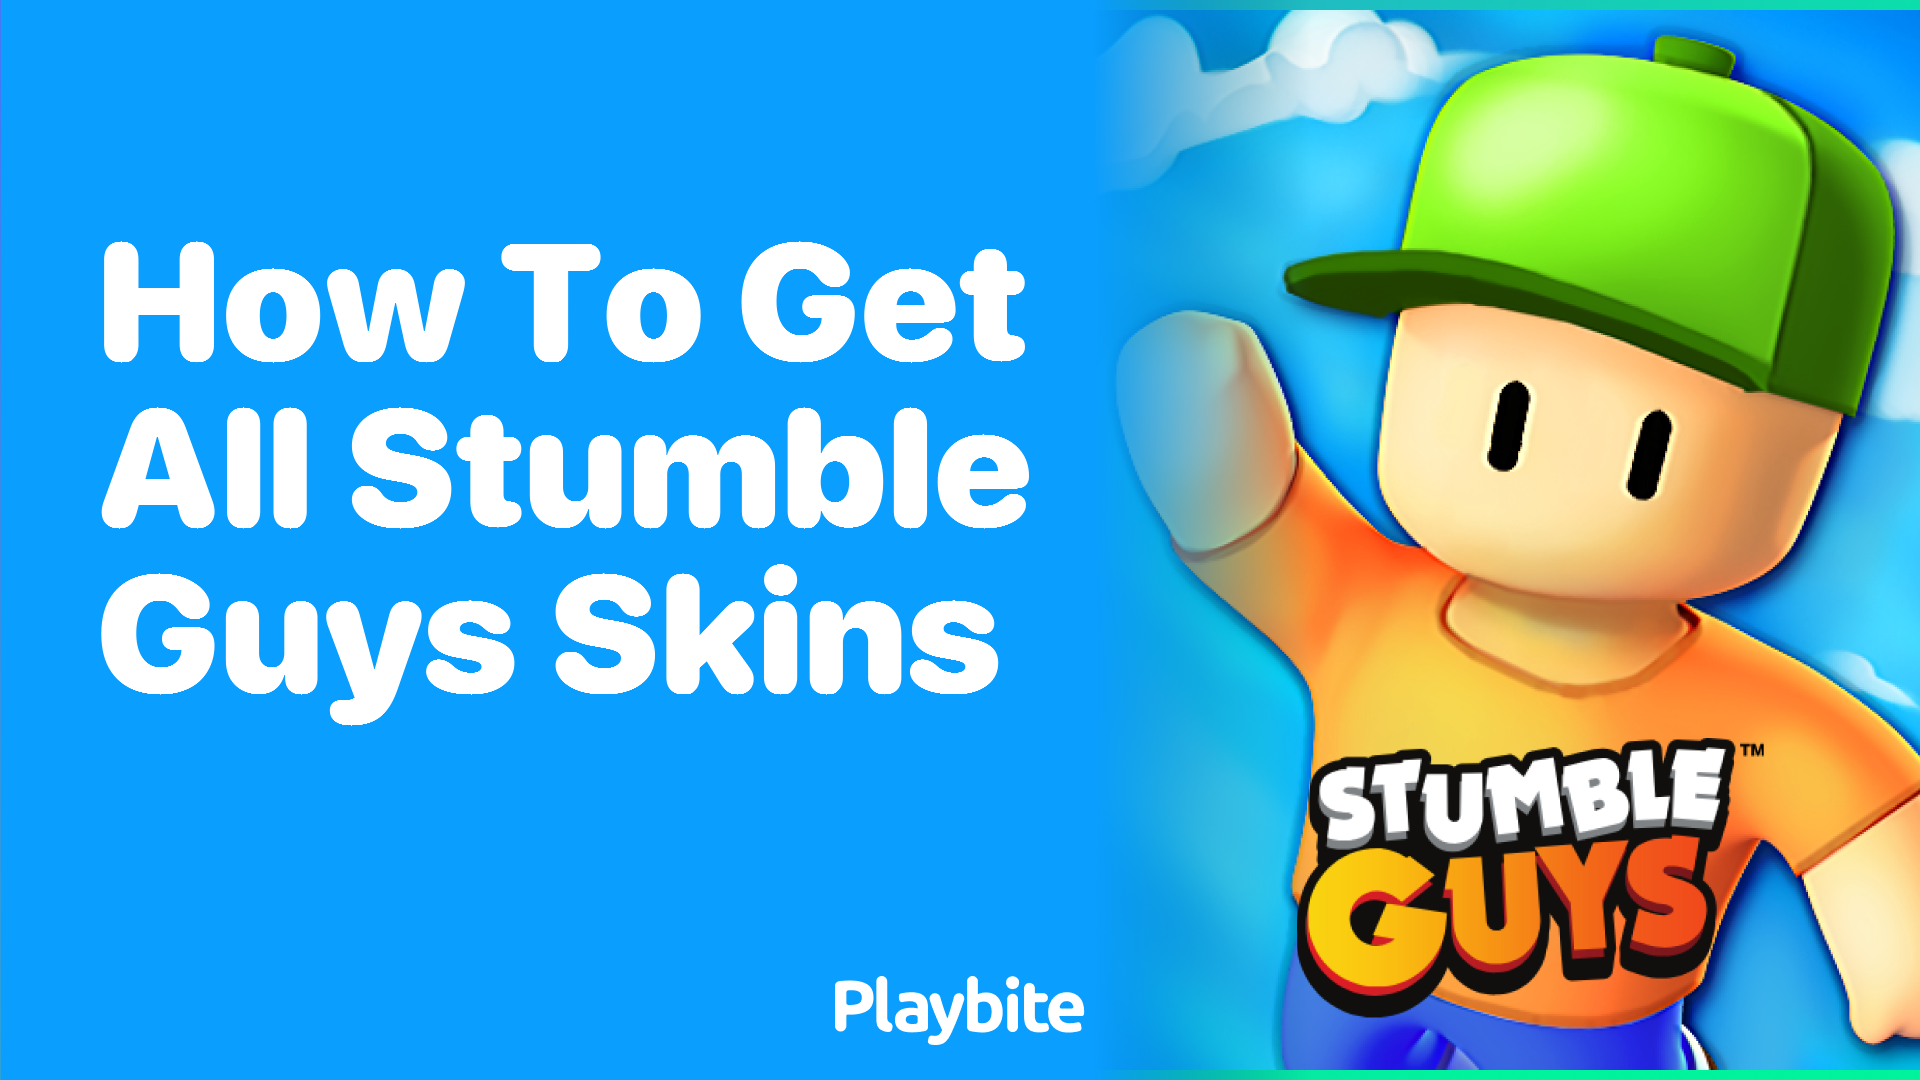 How to Get All Stumble Guys Skins? Discover the Secrets!